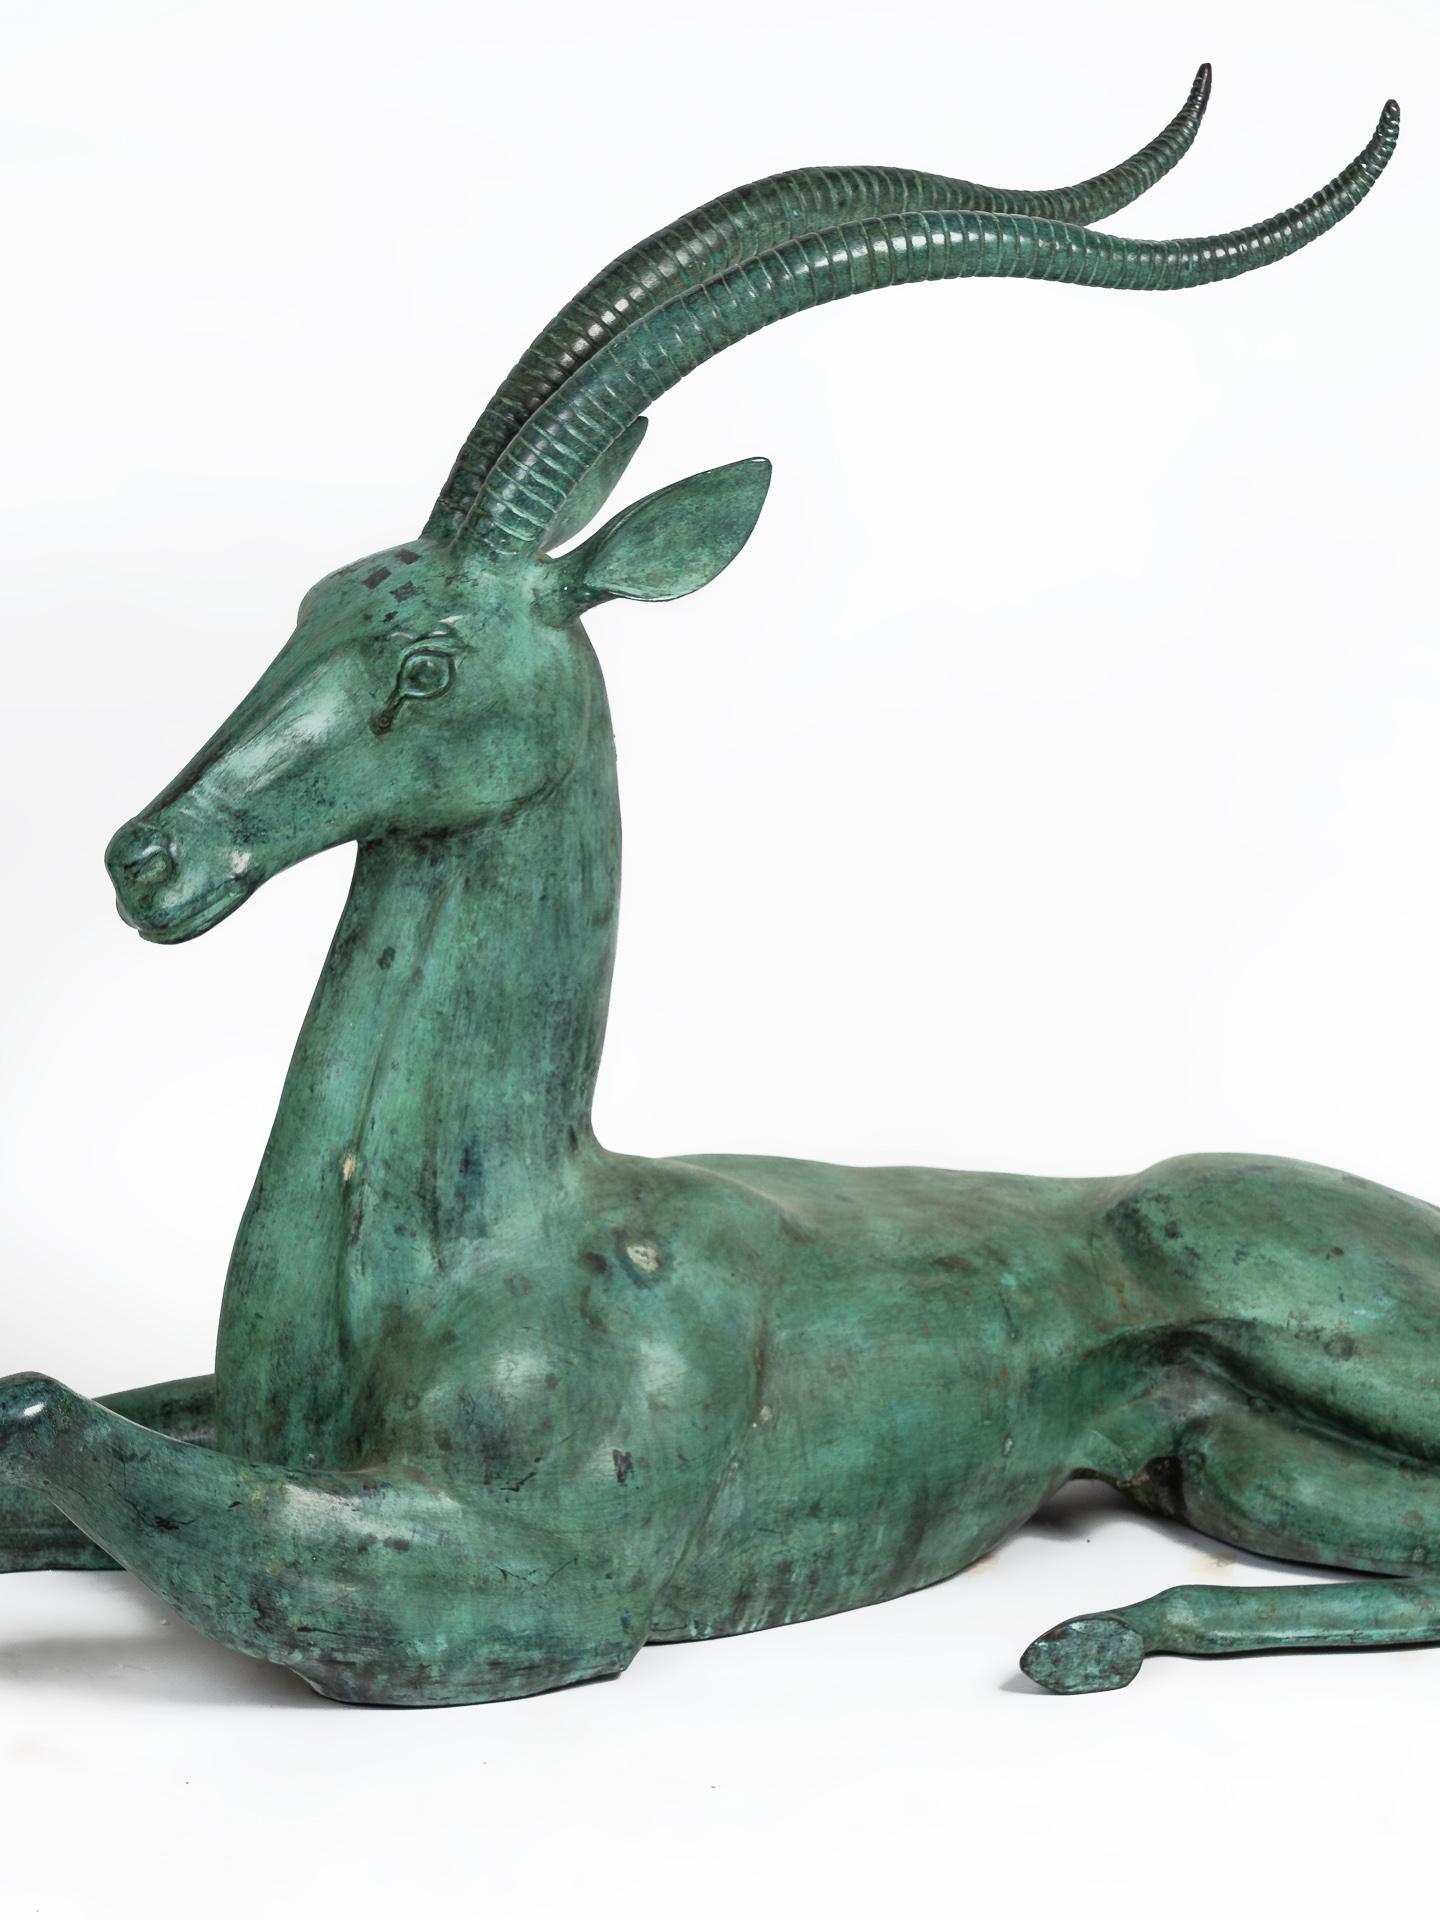 Fabulous addition to any decor, large bronze handcrafted North African resting antelope sculpture. Very large vintage midcentury solid hollow cast bronze antelope sculpture in great condition and fine details. Handmade decorative metalwork bronze